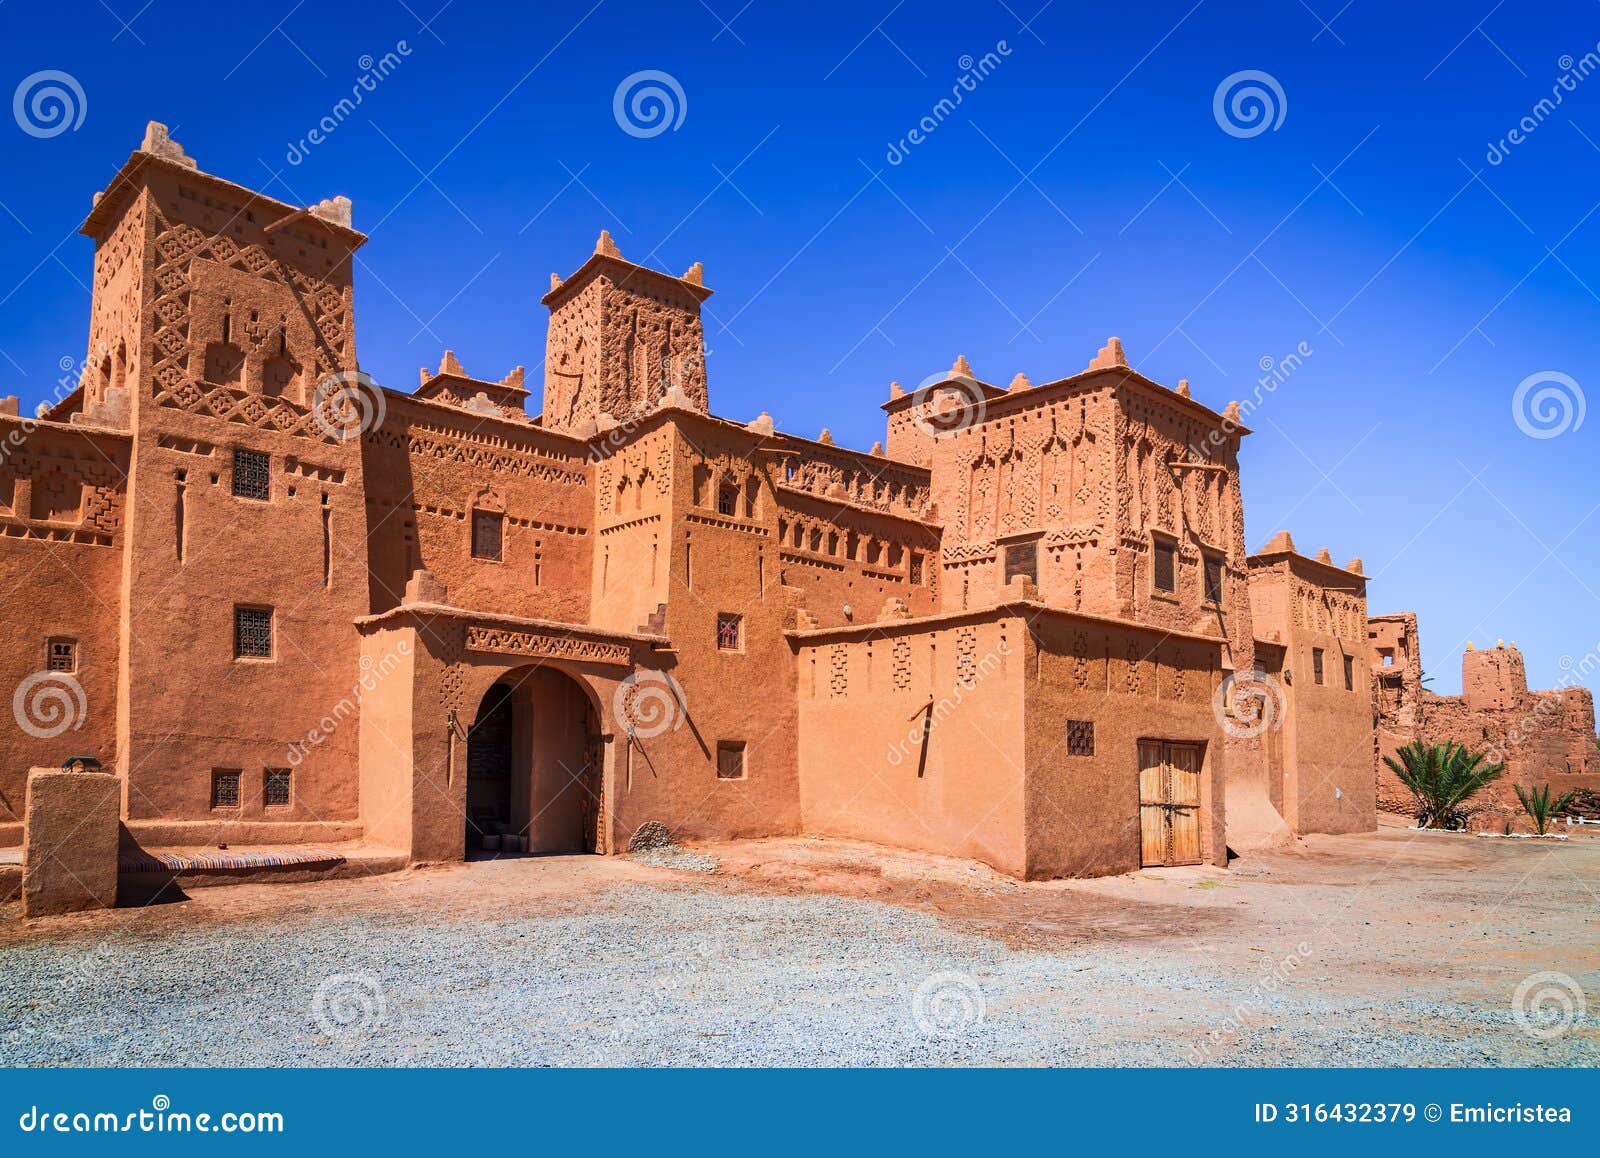 skoura, morocco. kasbah amridil, historical fortified architecture in high atlas mountains range